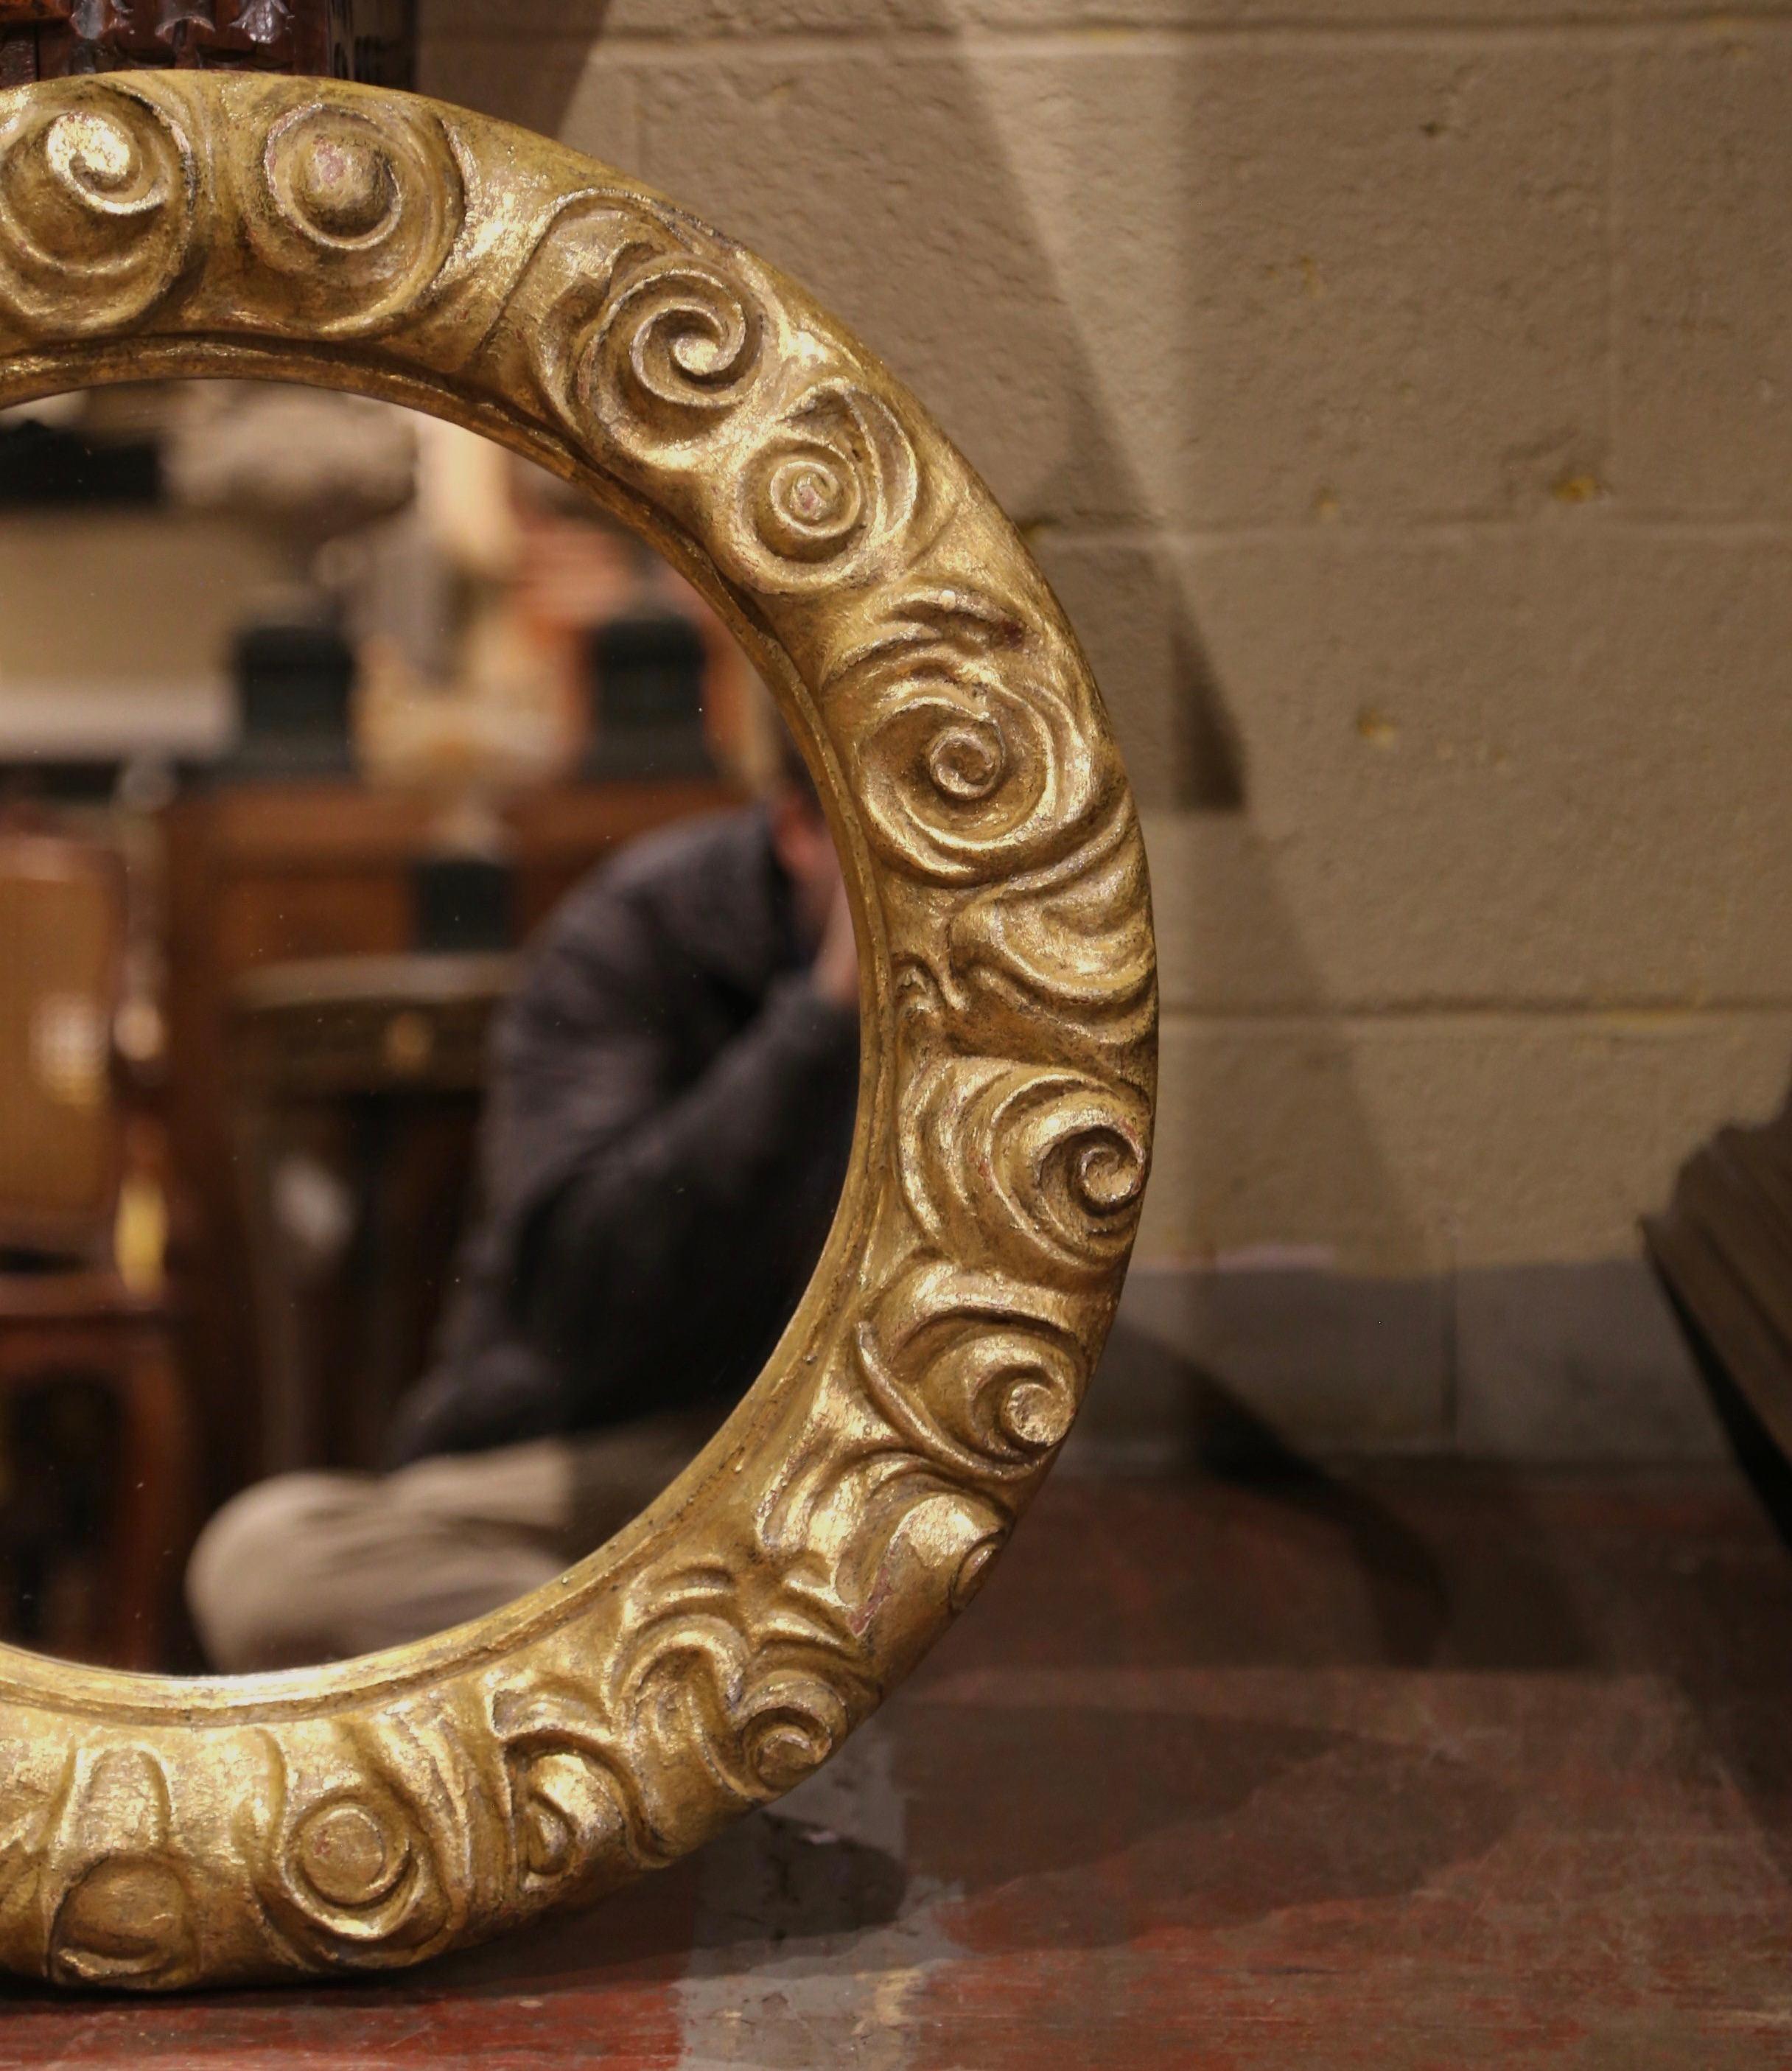 Mid-20th Century French Carved Gilt Wood Round Mirror with Floral Motifs In Excellent Condition For Sale In Dallas, TX